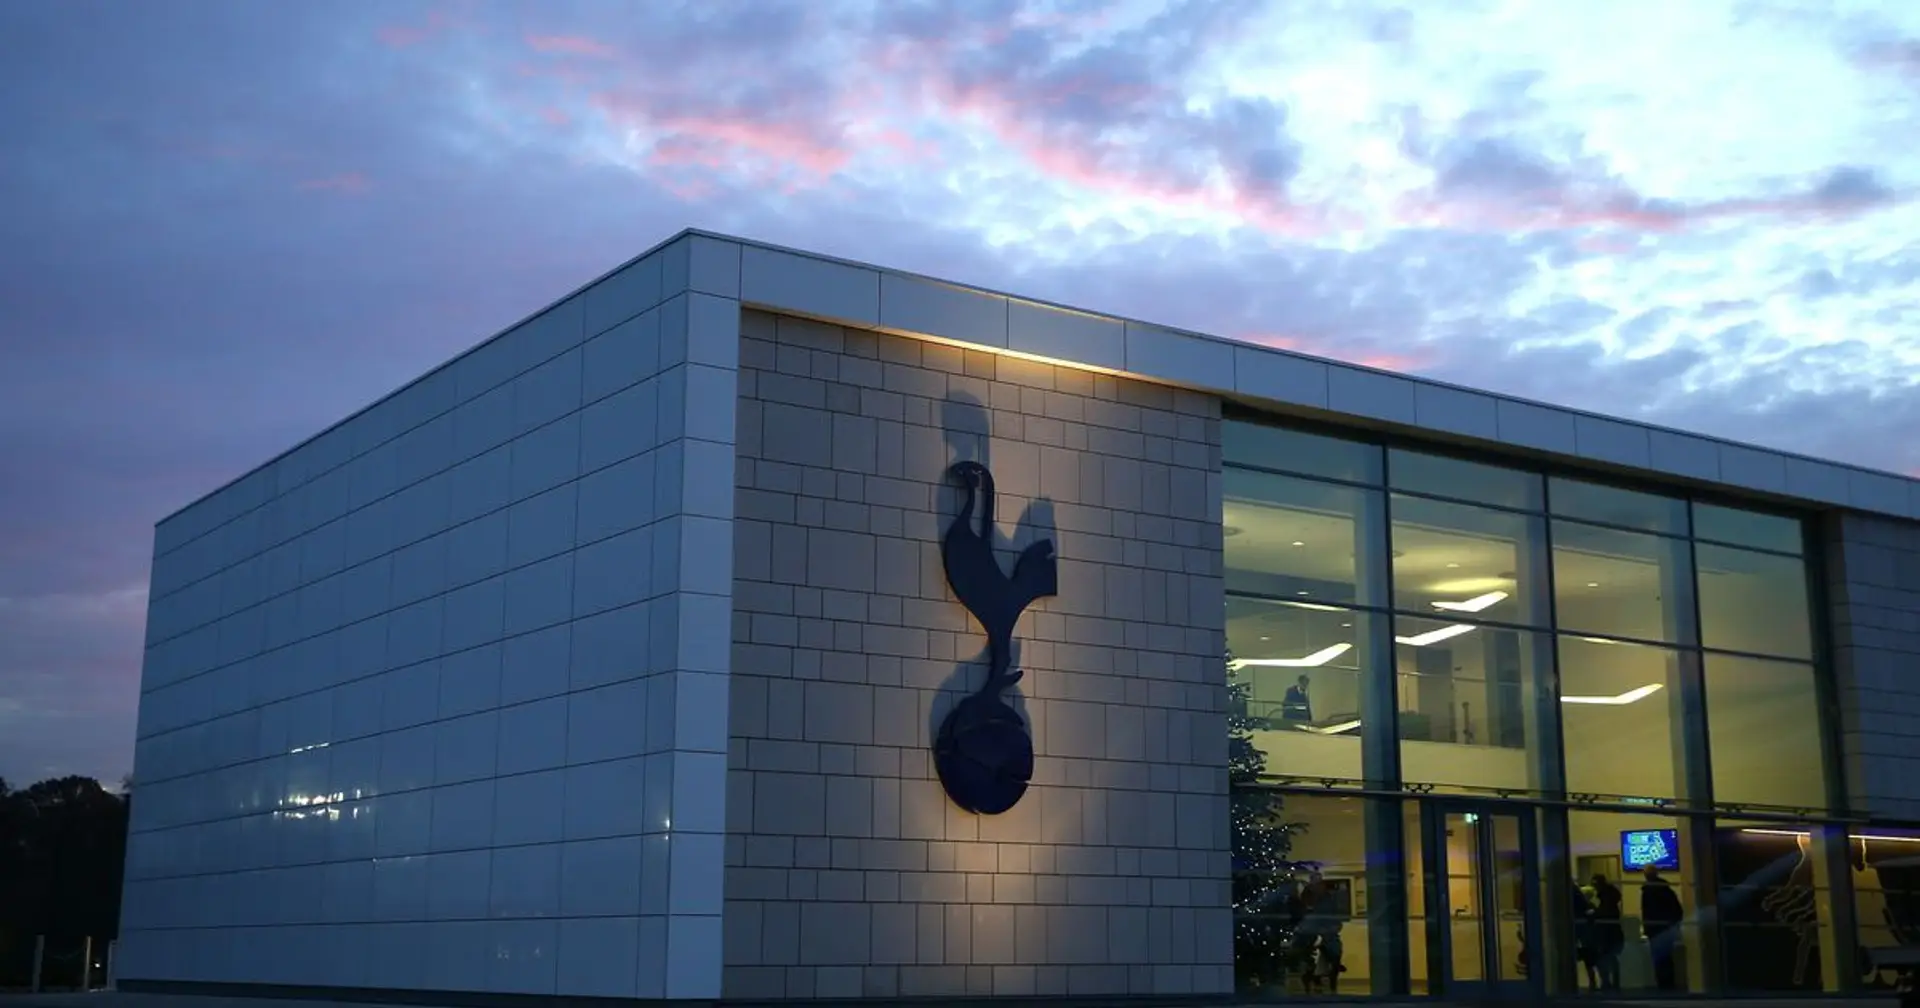 Tottenham Hotspur 'hit by Covid outbreak' with multiple players sidelined before Christmas period